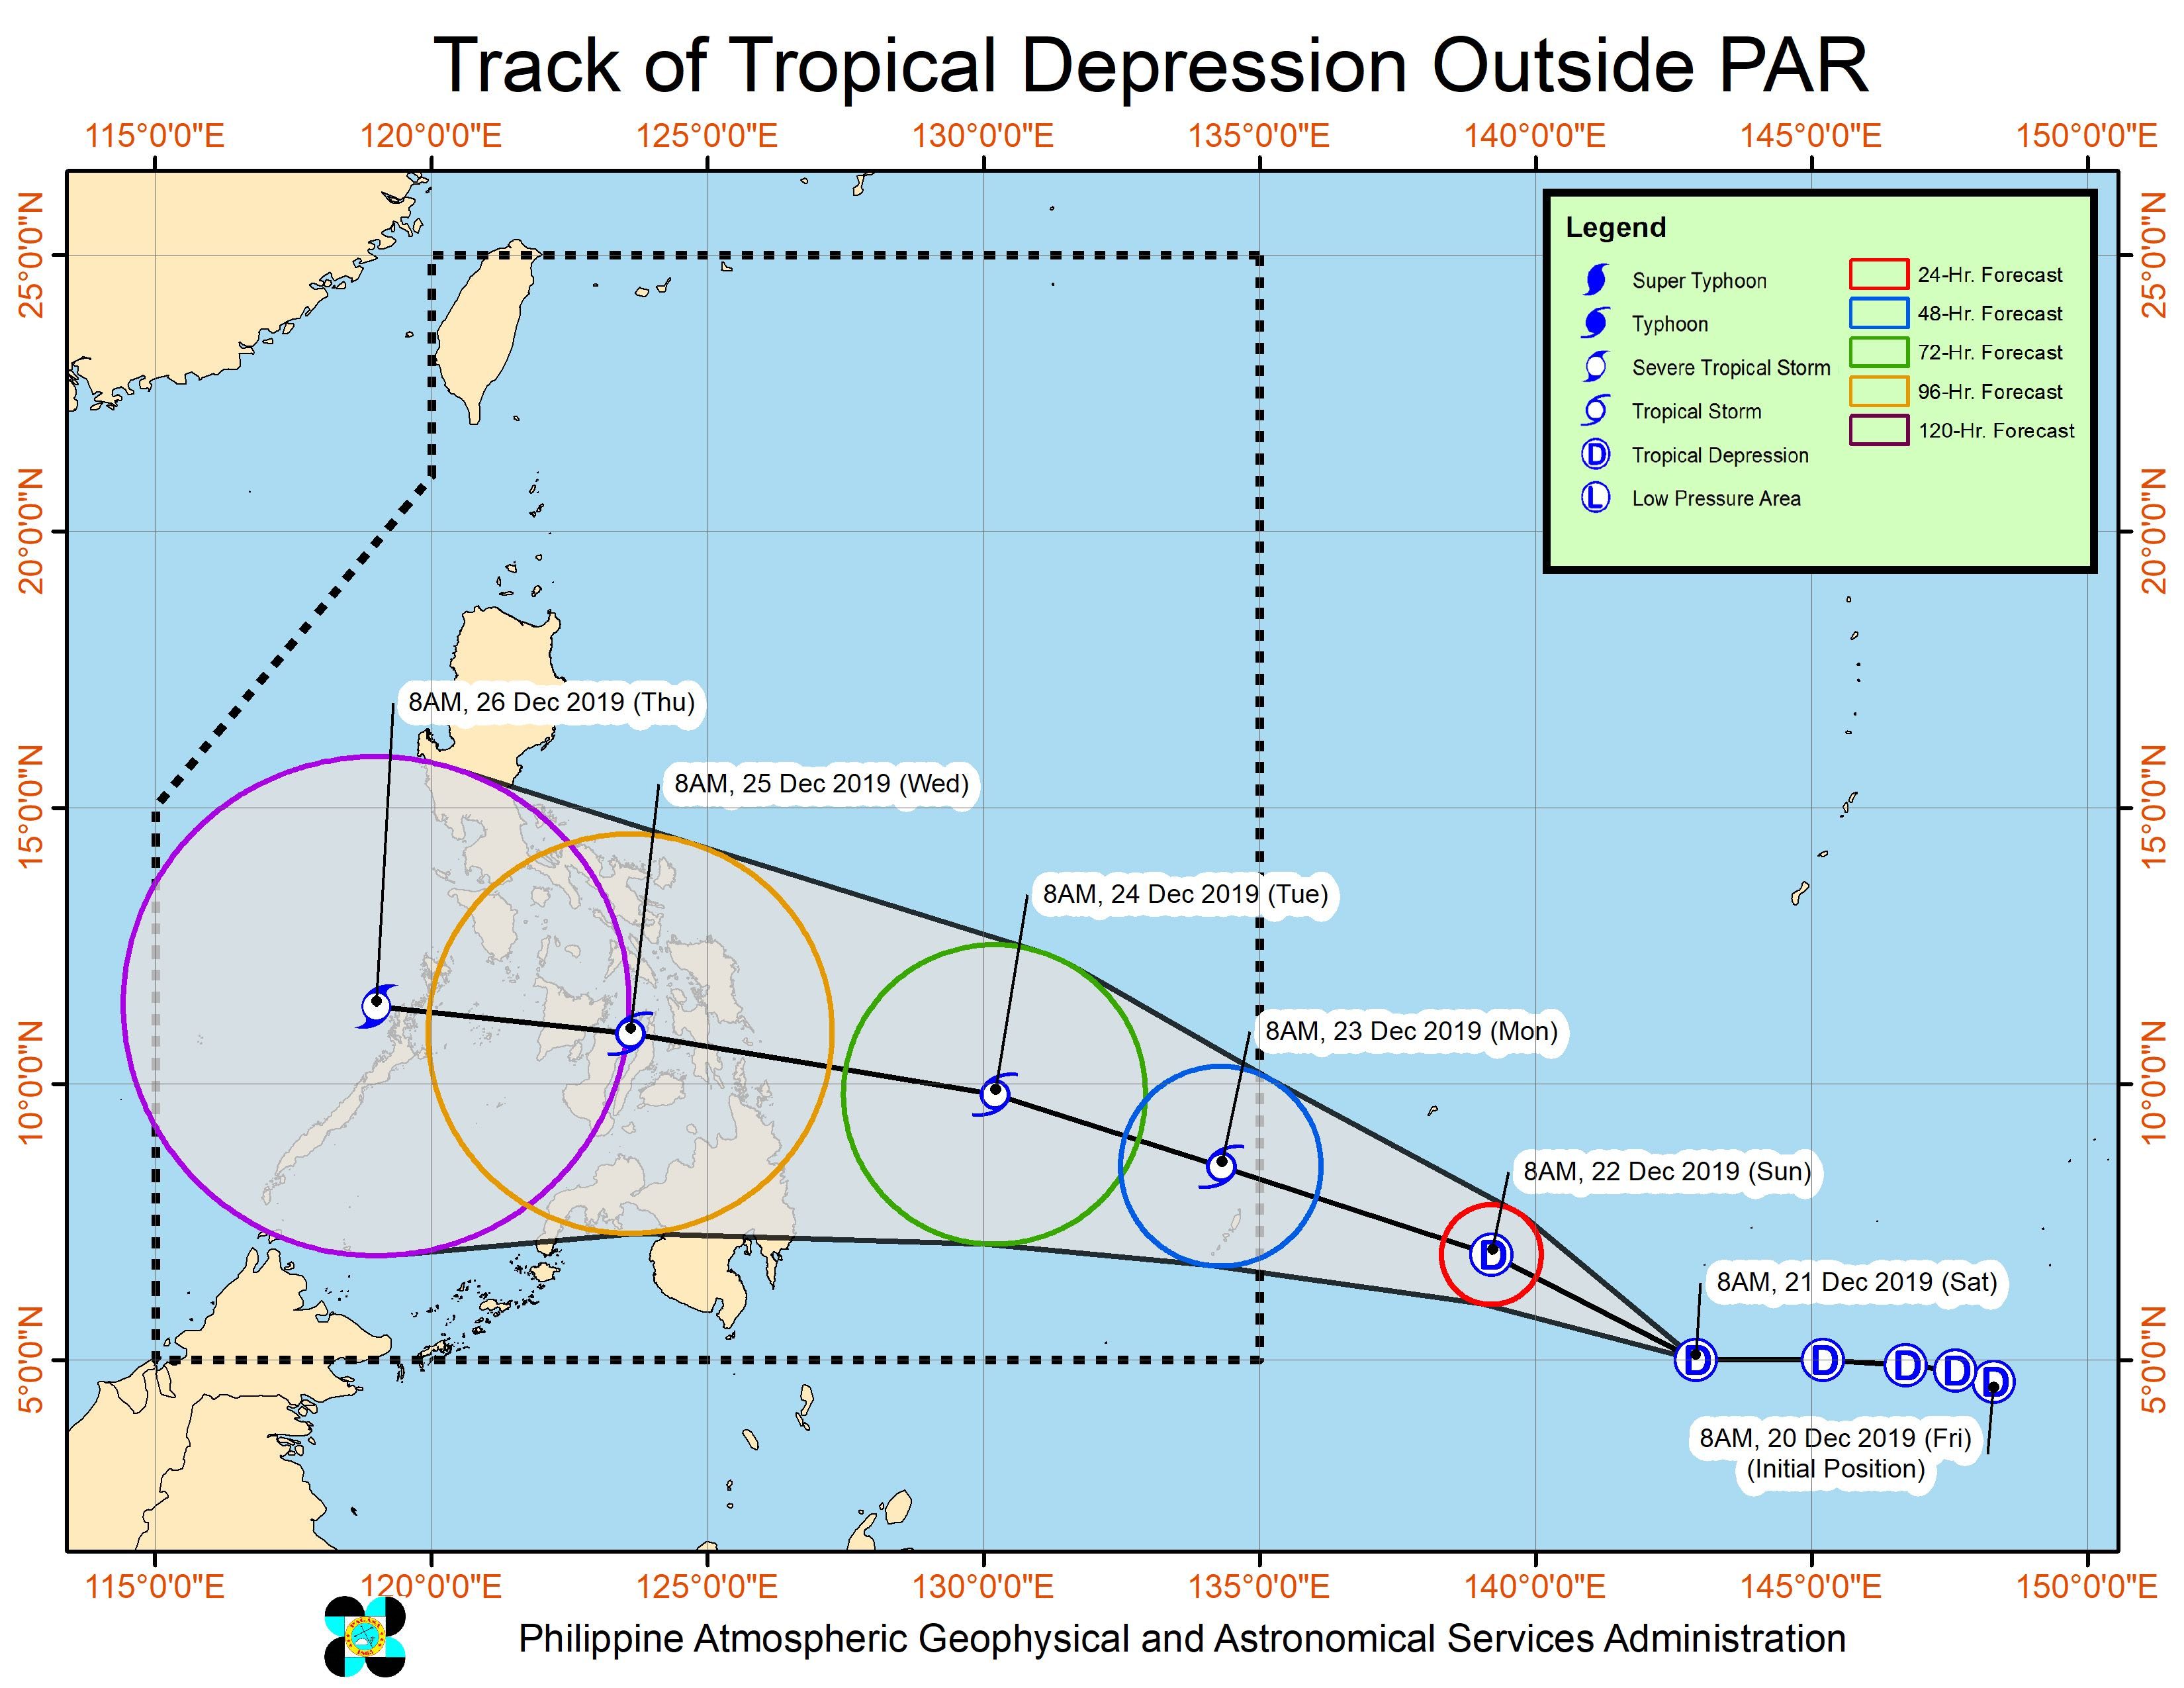 Forecast track of the tropical depression, which is still outside the Philippine Area of Responsibility, as of December 21, 2019, 11 am. Image from PAGASA 